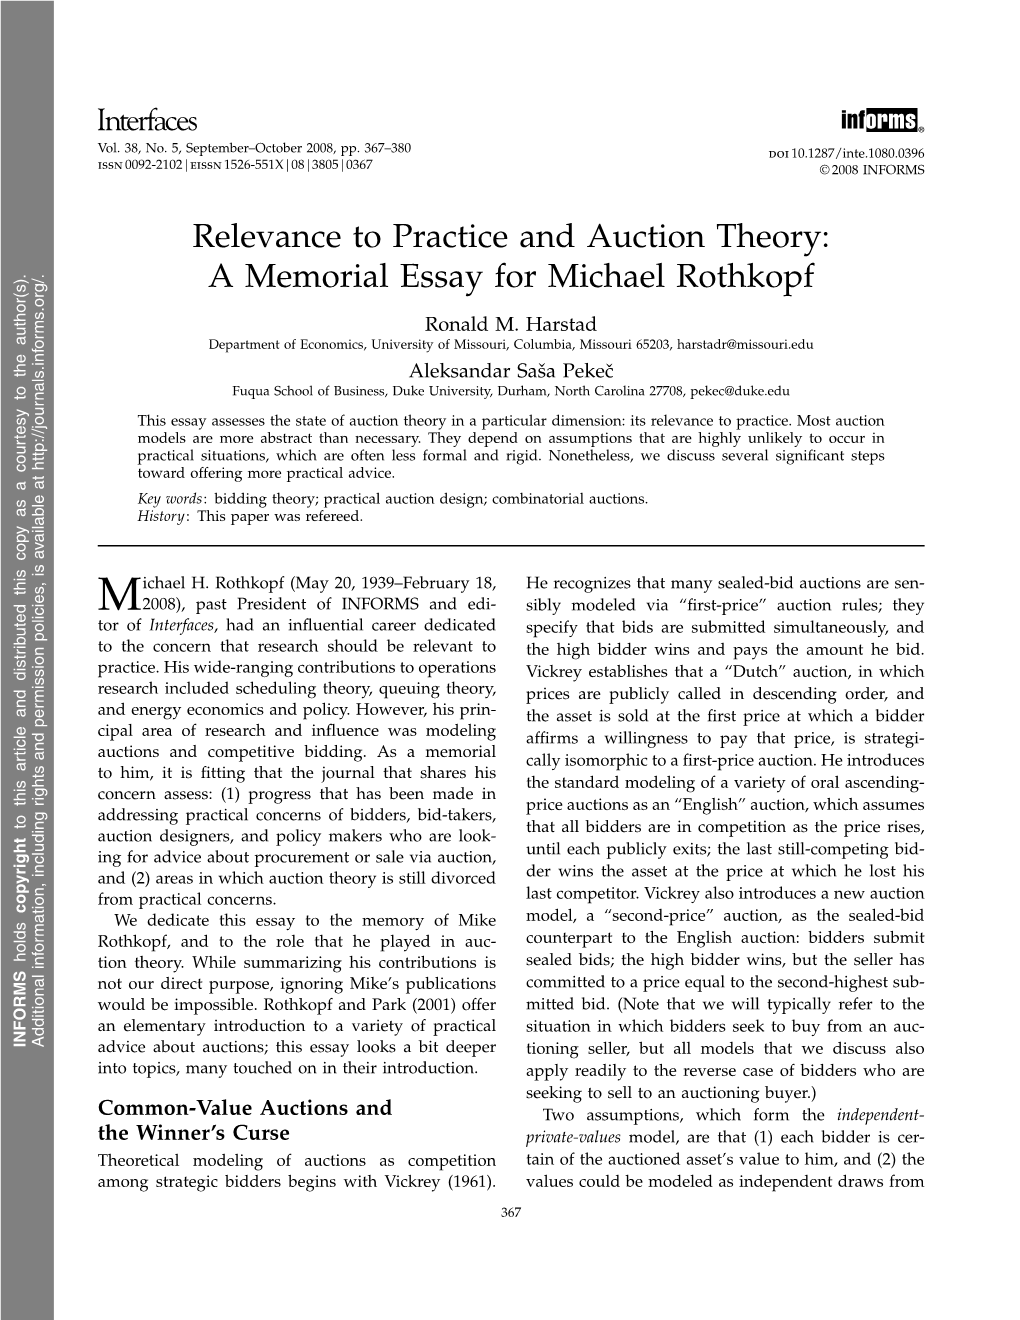 Relevance to Practice and Auction Theory: a Memorial Essay for Michael Rothkopf